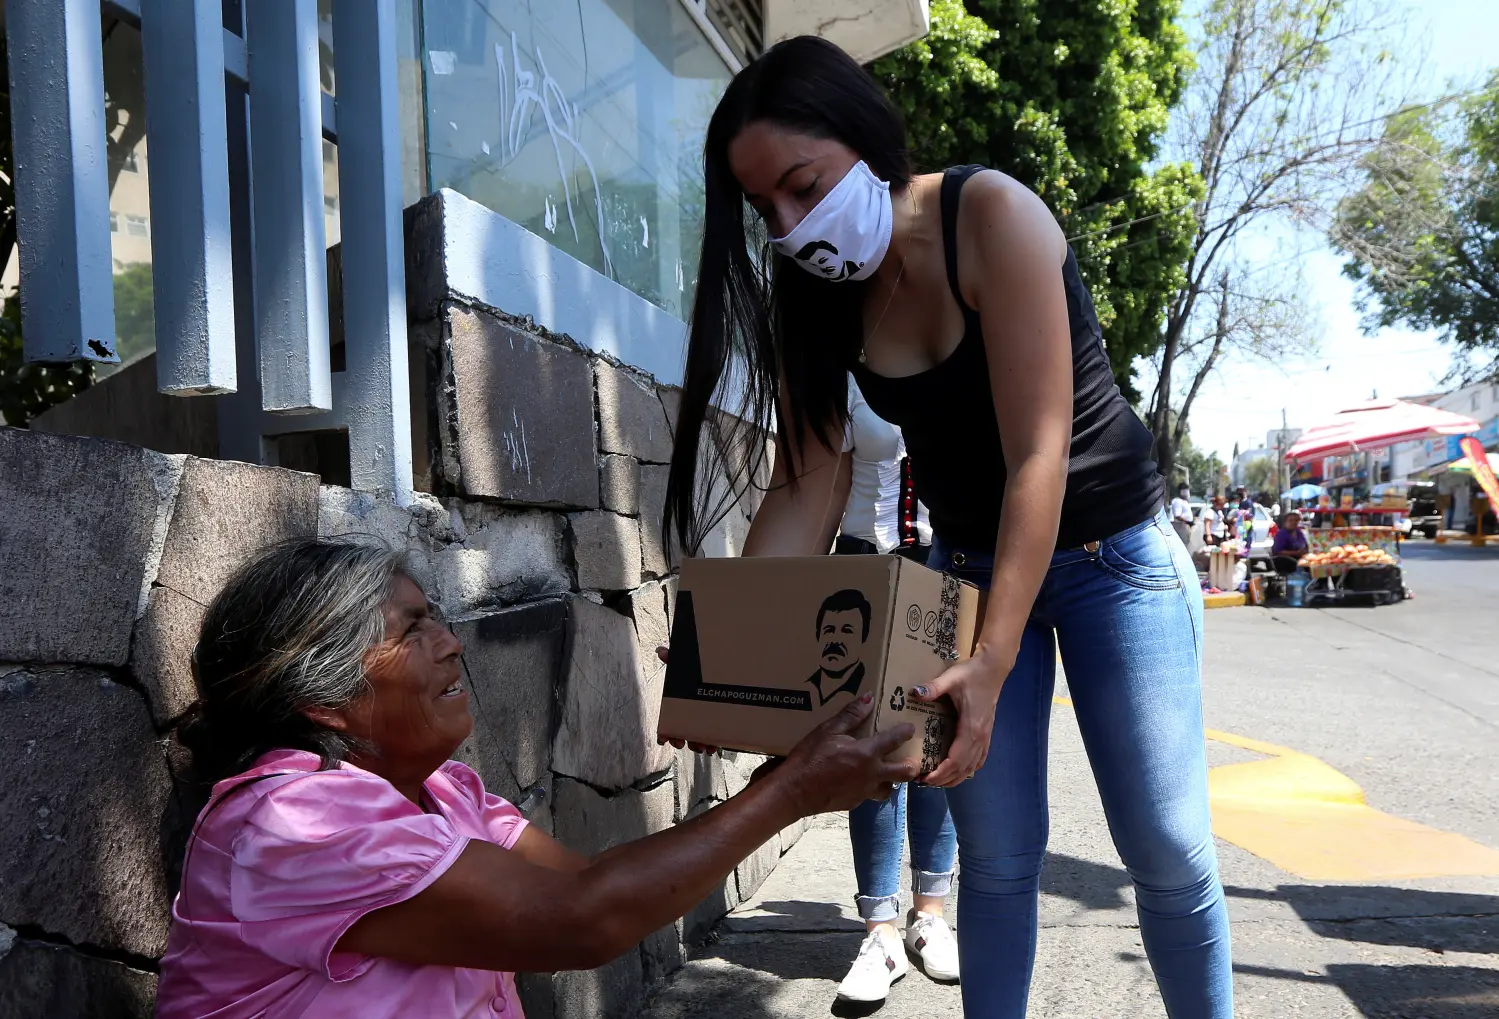 An employee of the clothing brand "El Chapo 701", owned by Alejandrina Gisselle Guzman, daughter of the convicted drug kingpin Joaquin "El Chapo" Guzman, hands out a box with food, face masks and hand sanitizers to an elderly woman as part of a campaign to help cash-strapped elderly people during the coronavirus disease (COVID-19) outbreak, in Guadalajara, Mexico April 16, 2020. The number 701 refers to the 2009 World's Billionaires ranking given by Forbes magazine to Mexican drug lord Joaquin "El Chapo" Guzman. REUTERS/Fernando Carranza